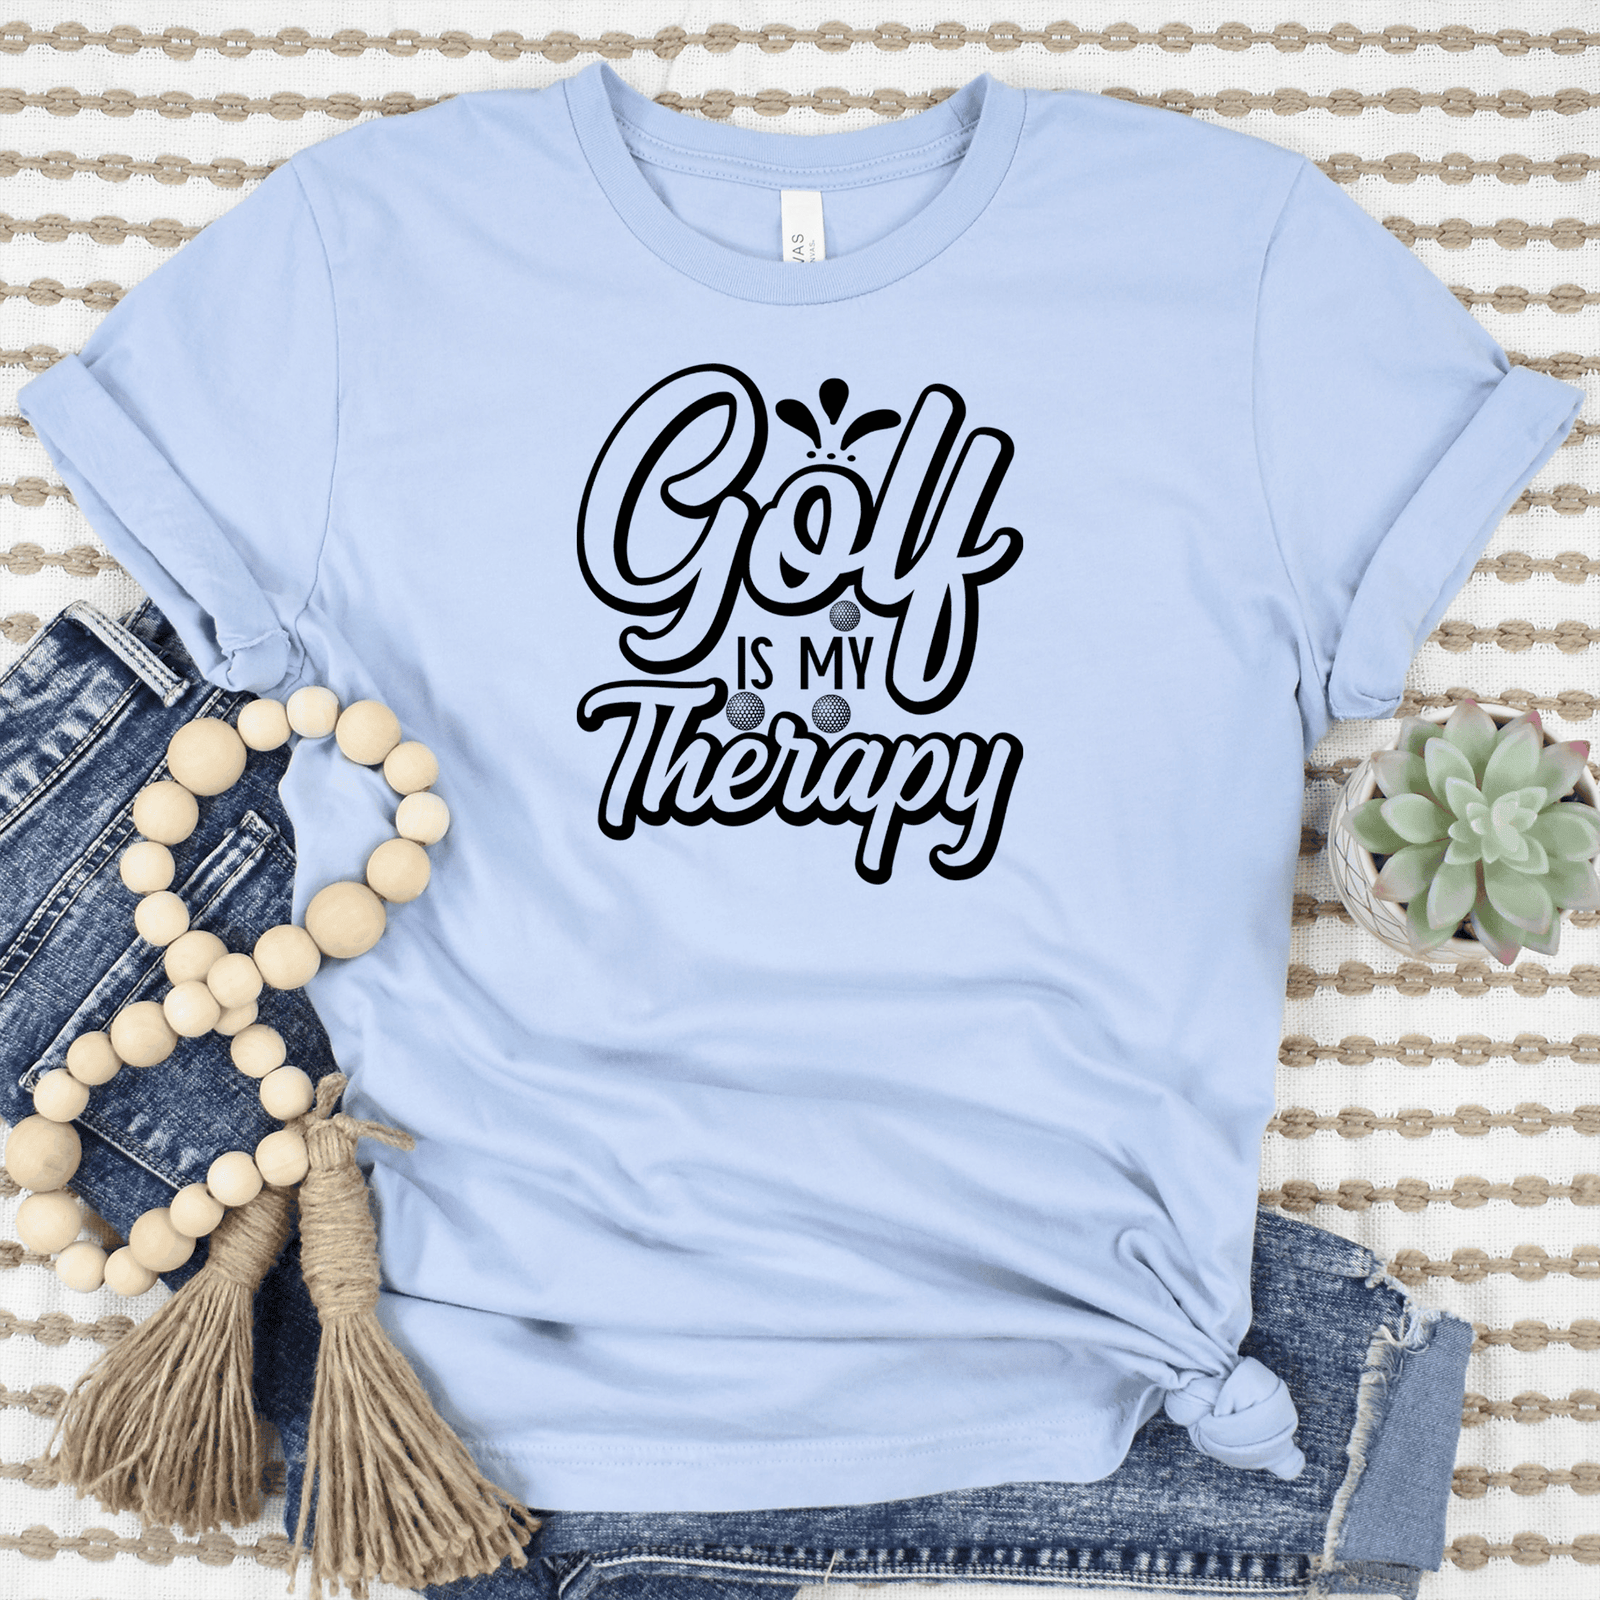 Womens Light Blue T Shirt with I-Golf-For-Therapy design